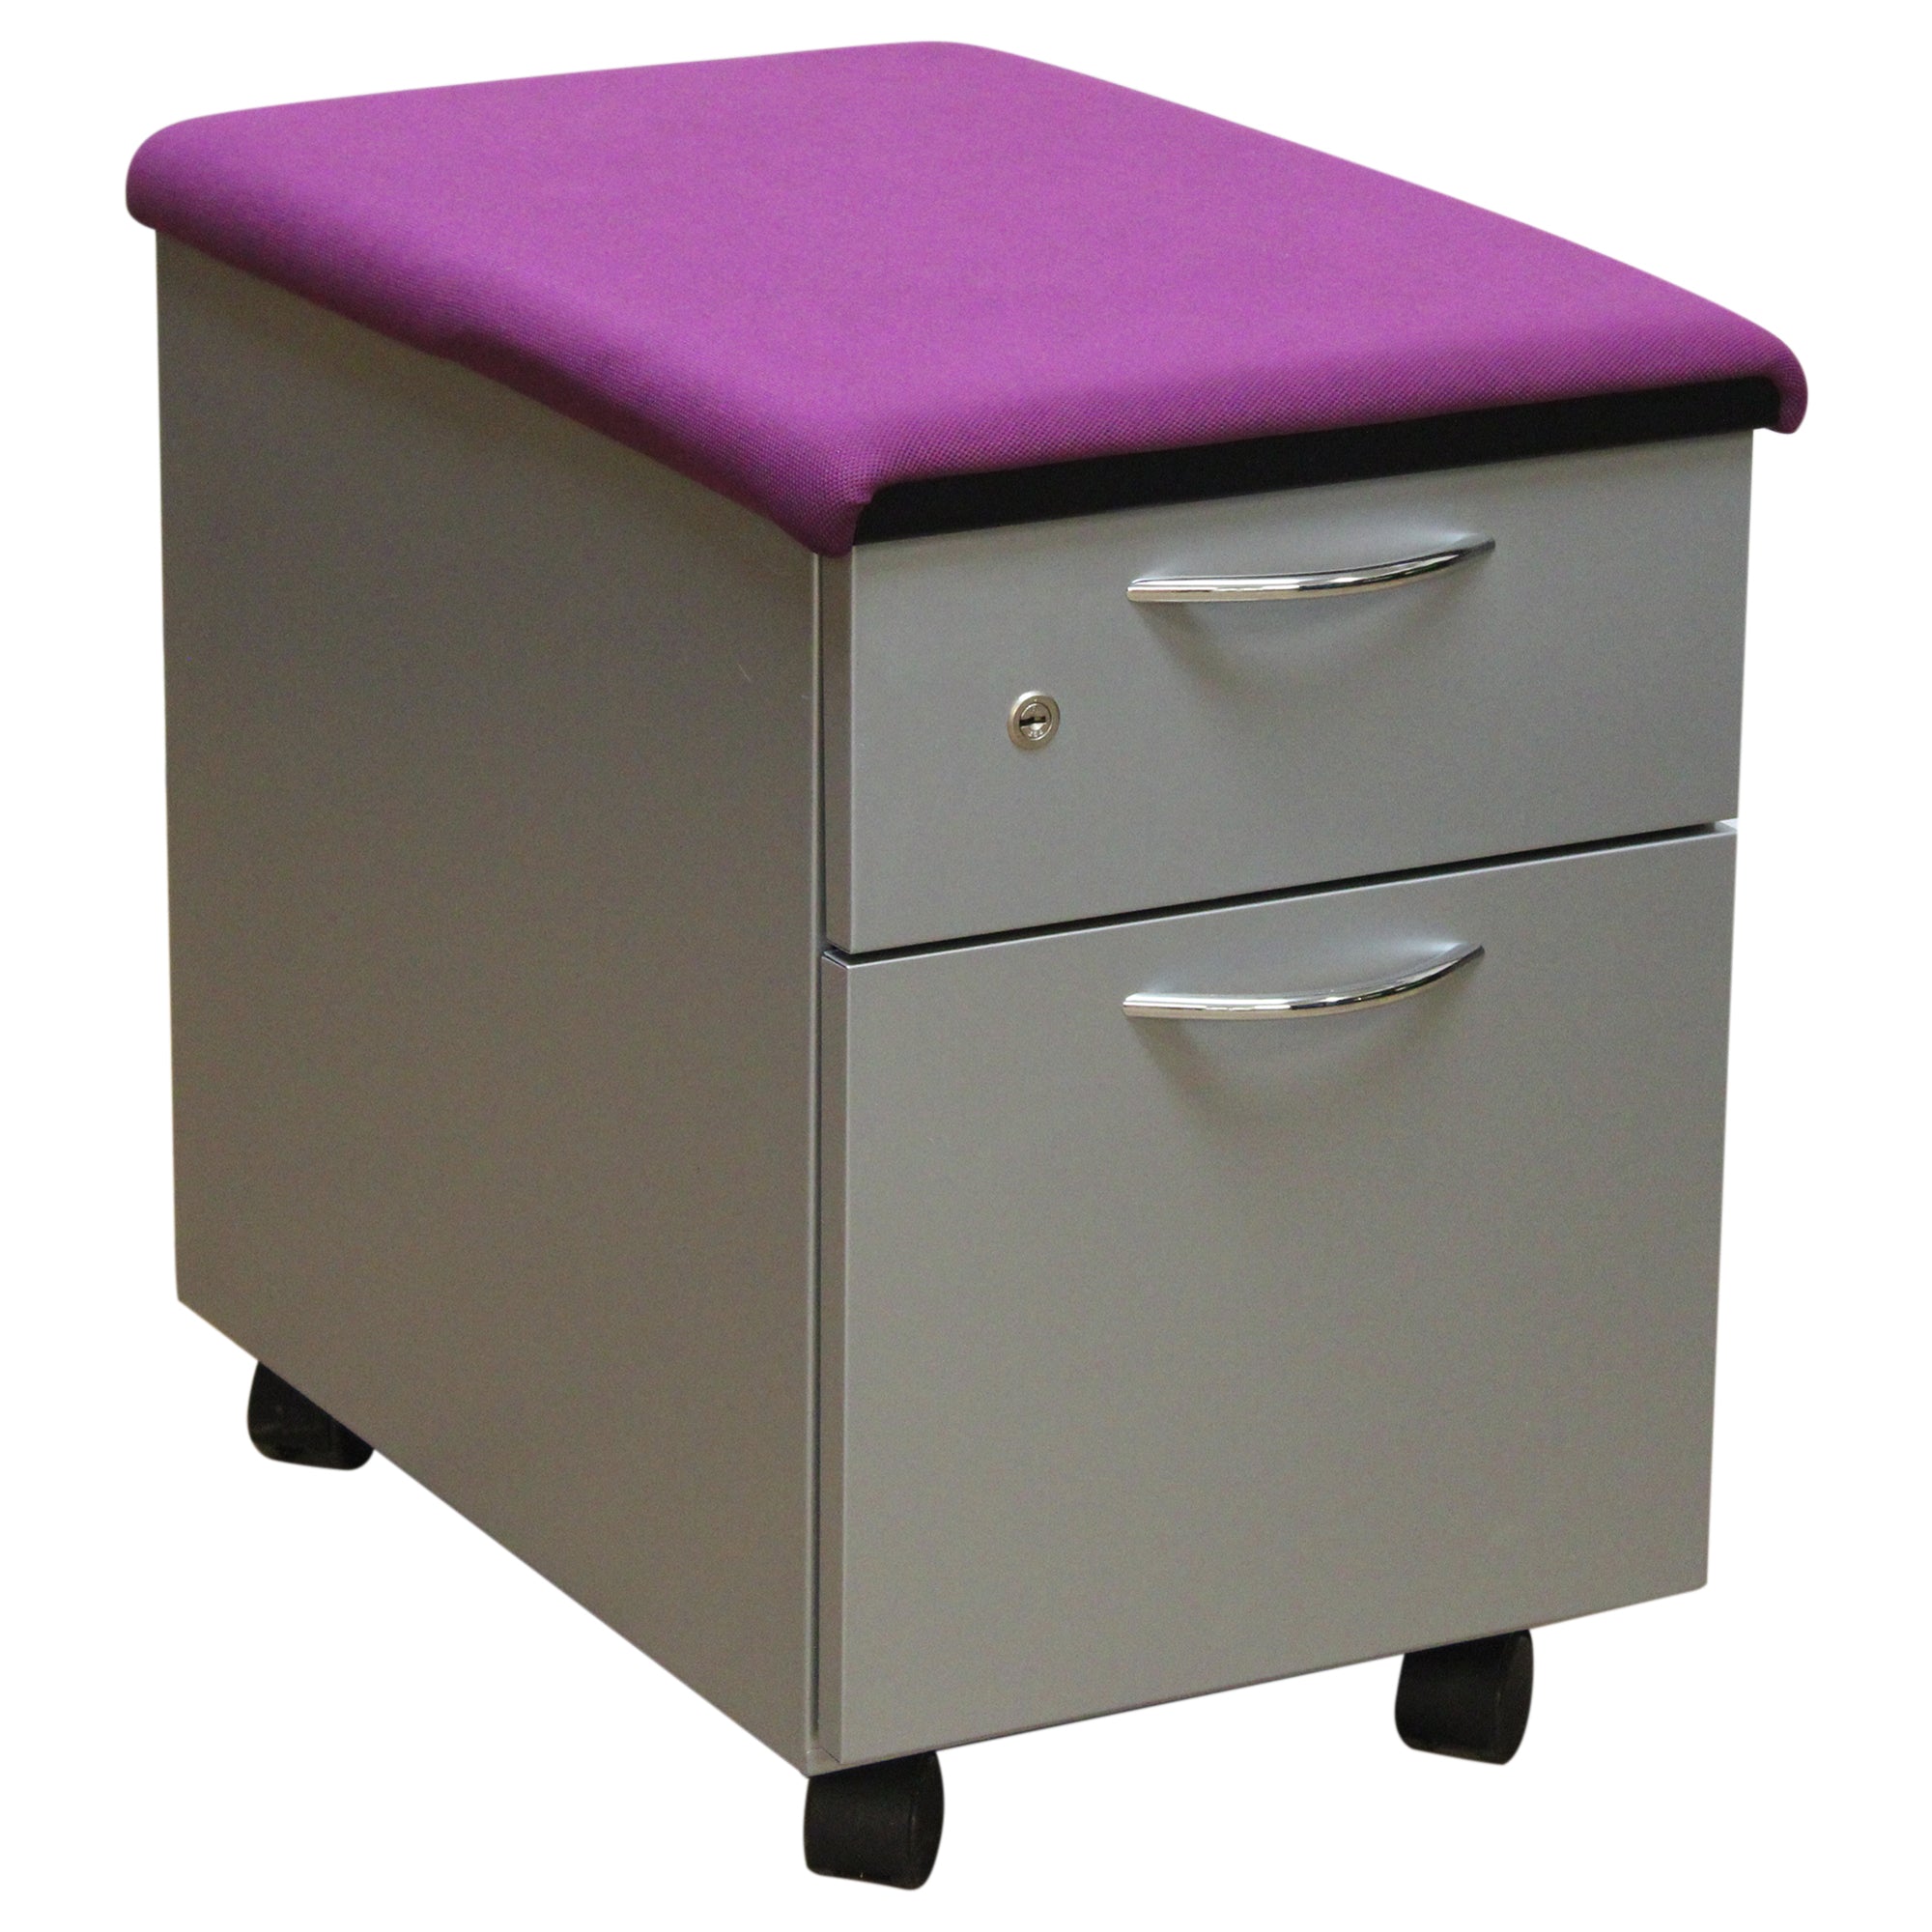 Steelcase 2-Drawer Mobile Pedestal with Cushion, Grey & Purple - Preowned